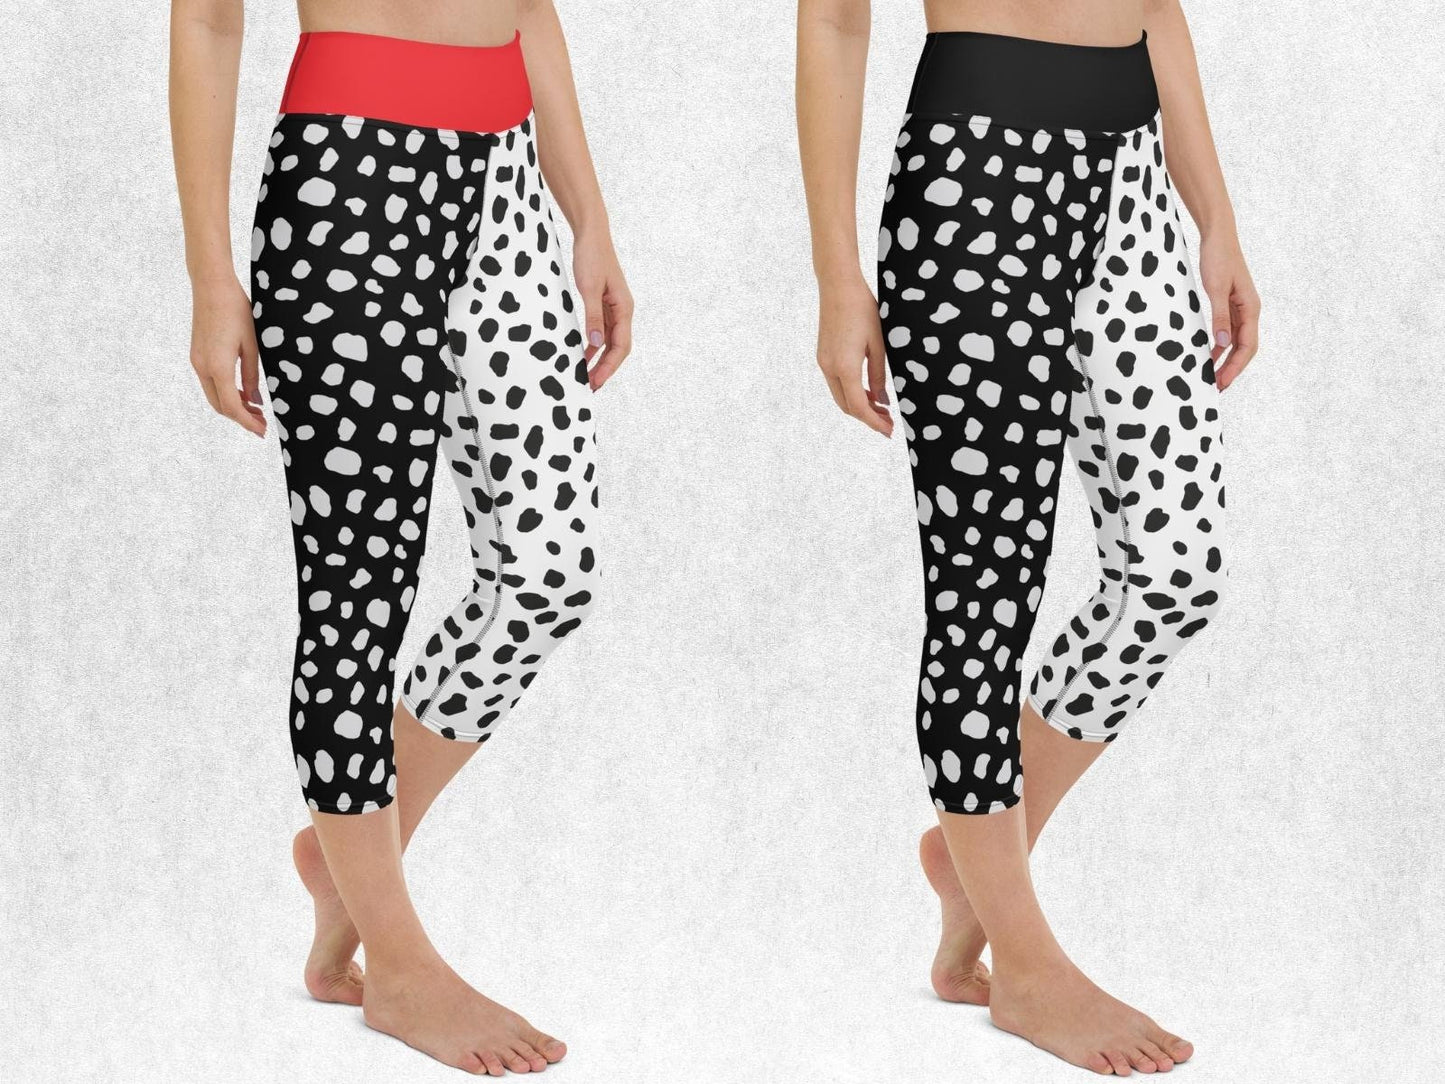 Cruel lady Yoga Capris, Woman Cosplay, Dalmatians, Adult Halloween Costume, Gift for Her, Cosplay Outfit, Gift for Daughter